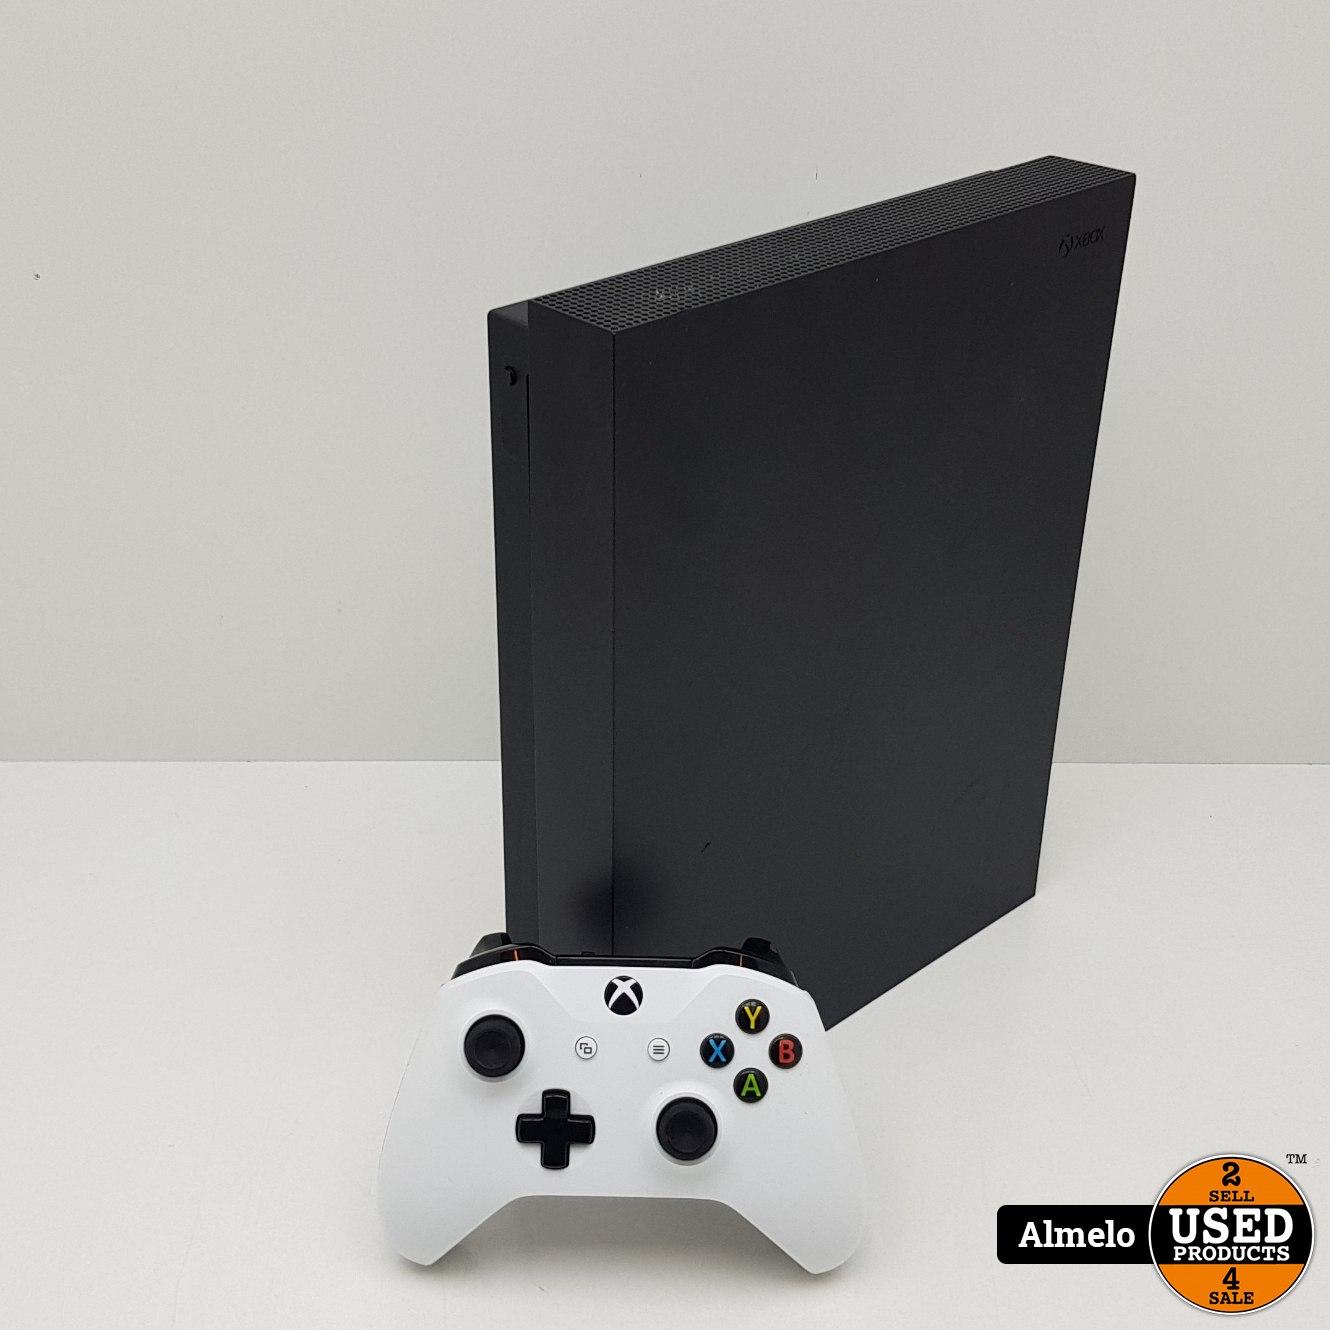 een paar gras Hoe dan ook Xbox one X 1TB - Used Products Almelo